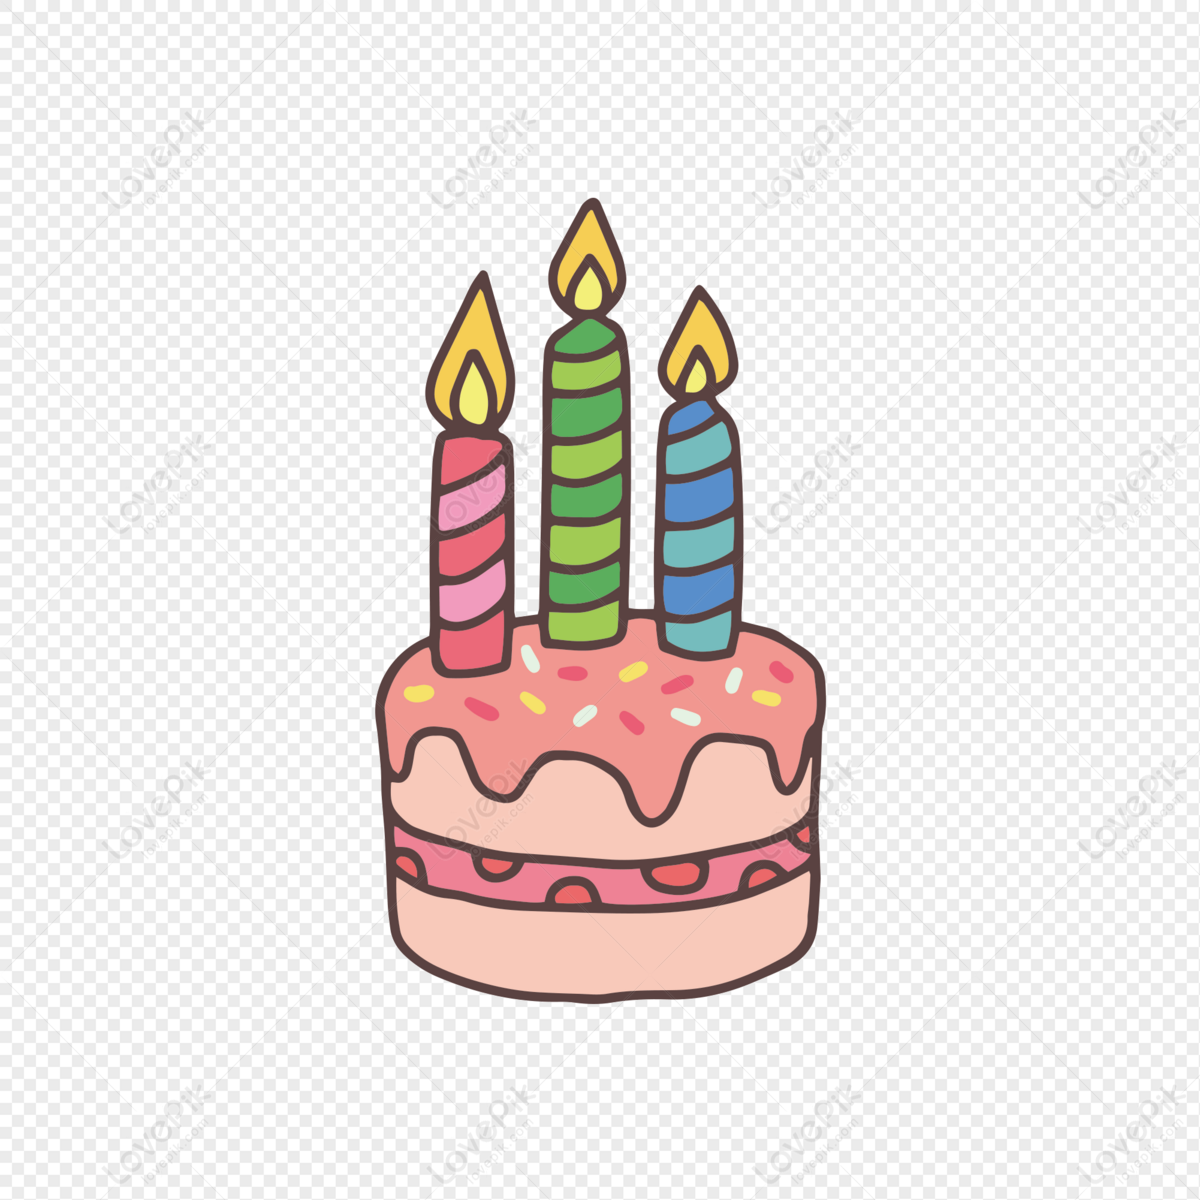 Birthday Cake PNG Transparent Image And Clipart Image For Free Download -  Lovepik | 401019117